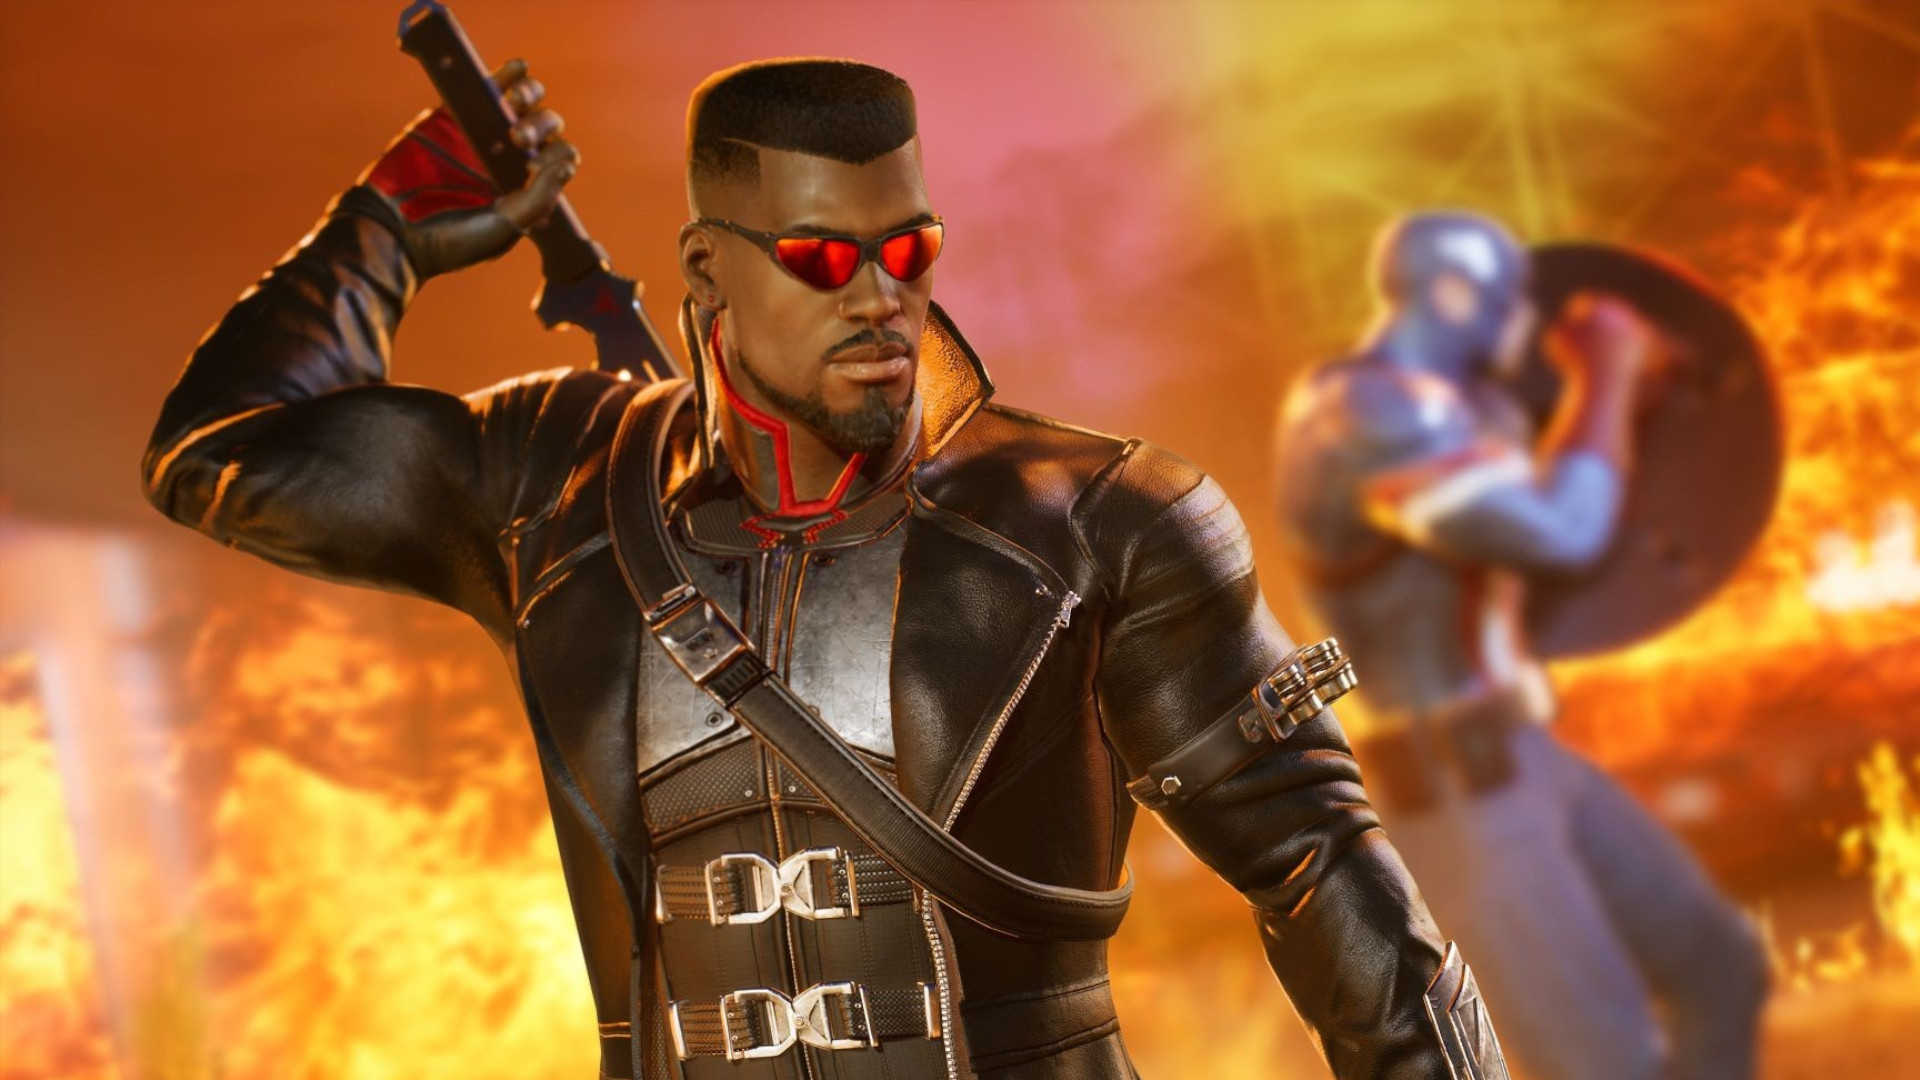 Midnight Suns character tier list: Blade (left) stands ready to draw his word, while Captain America (right) stands ready to take a hit